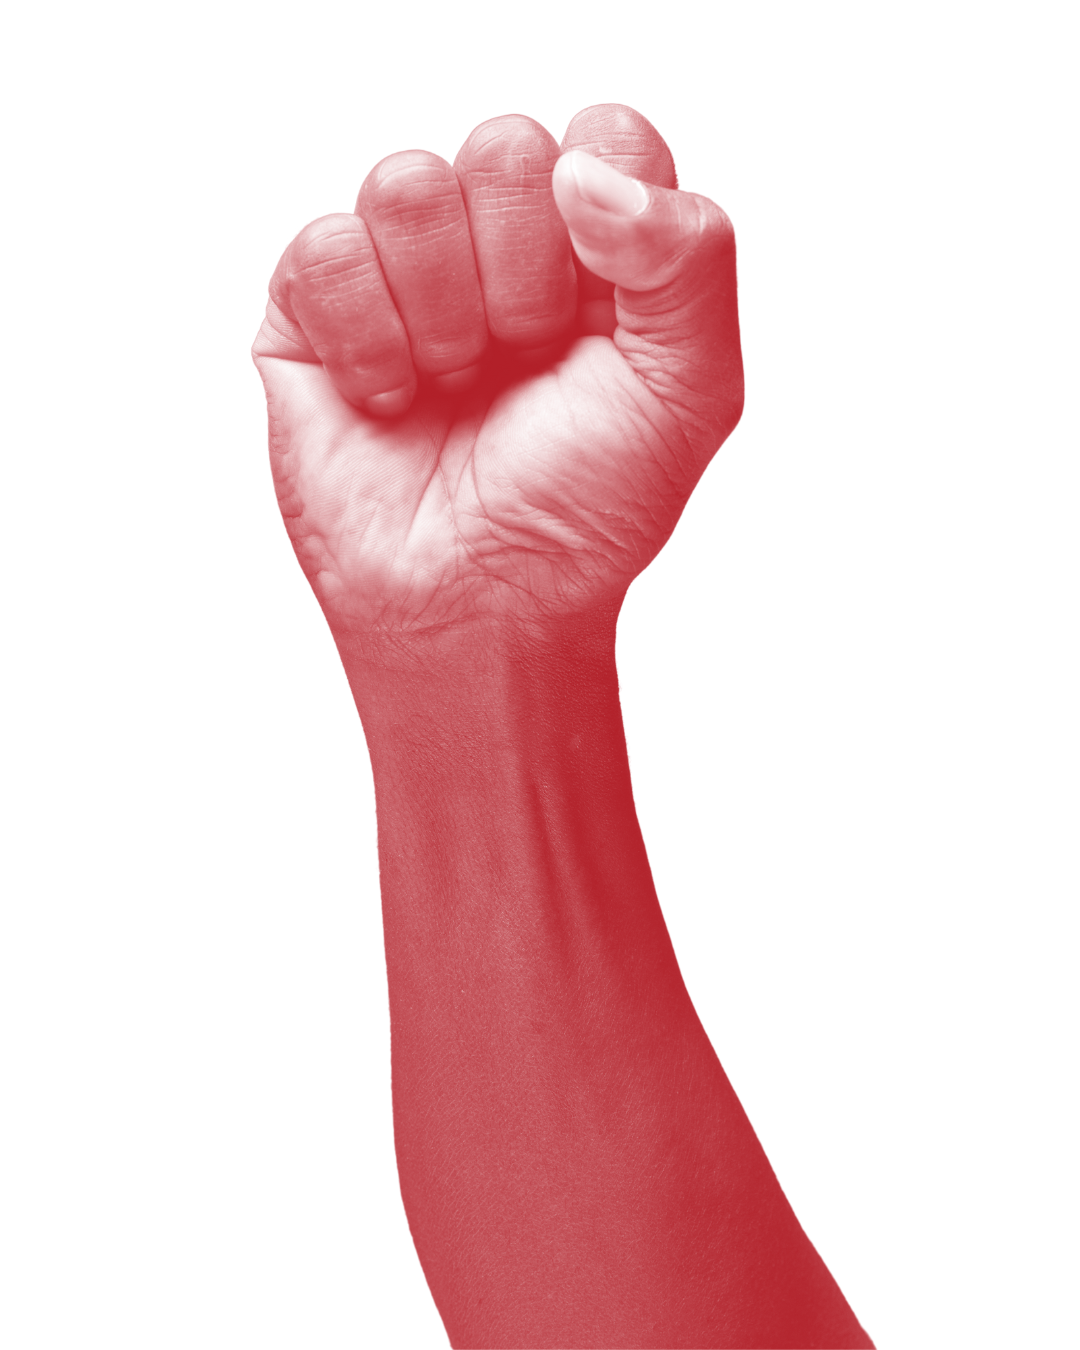 A red-tinted raised fist.